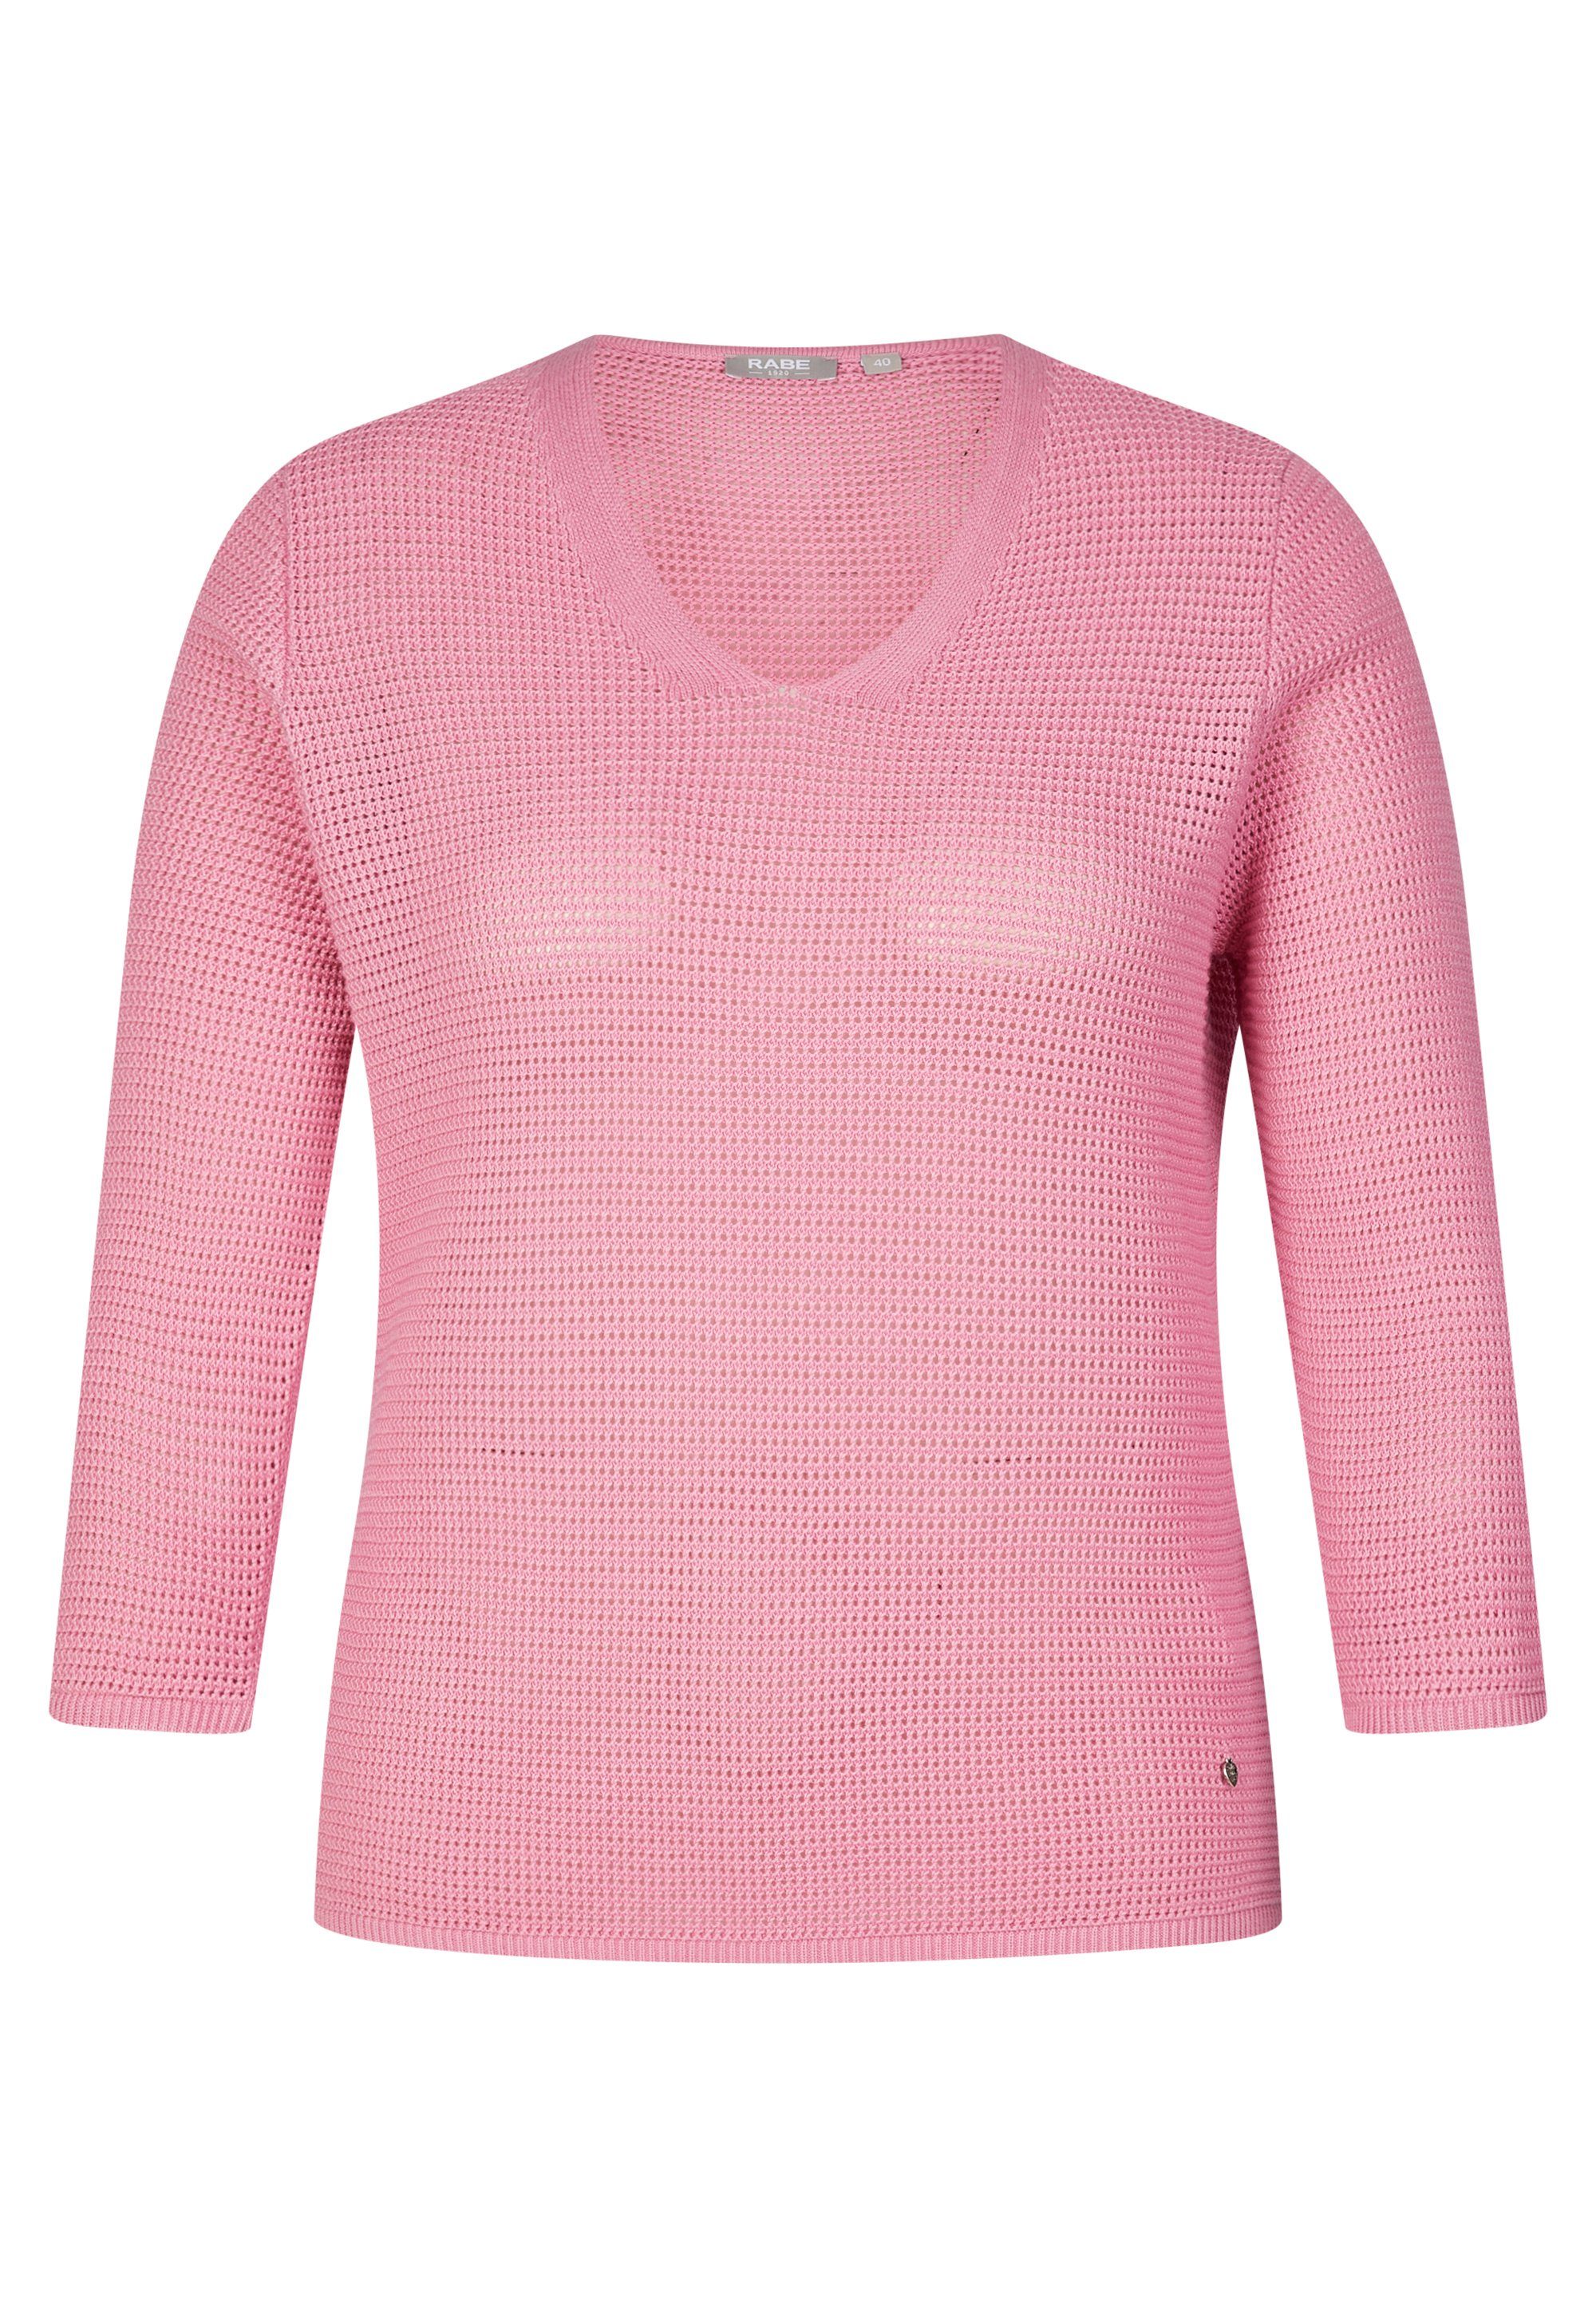 Rabe Strickpullover Pullover himbeere